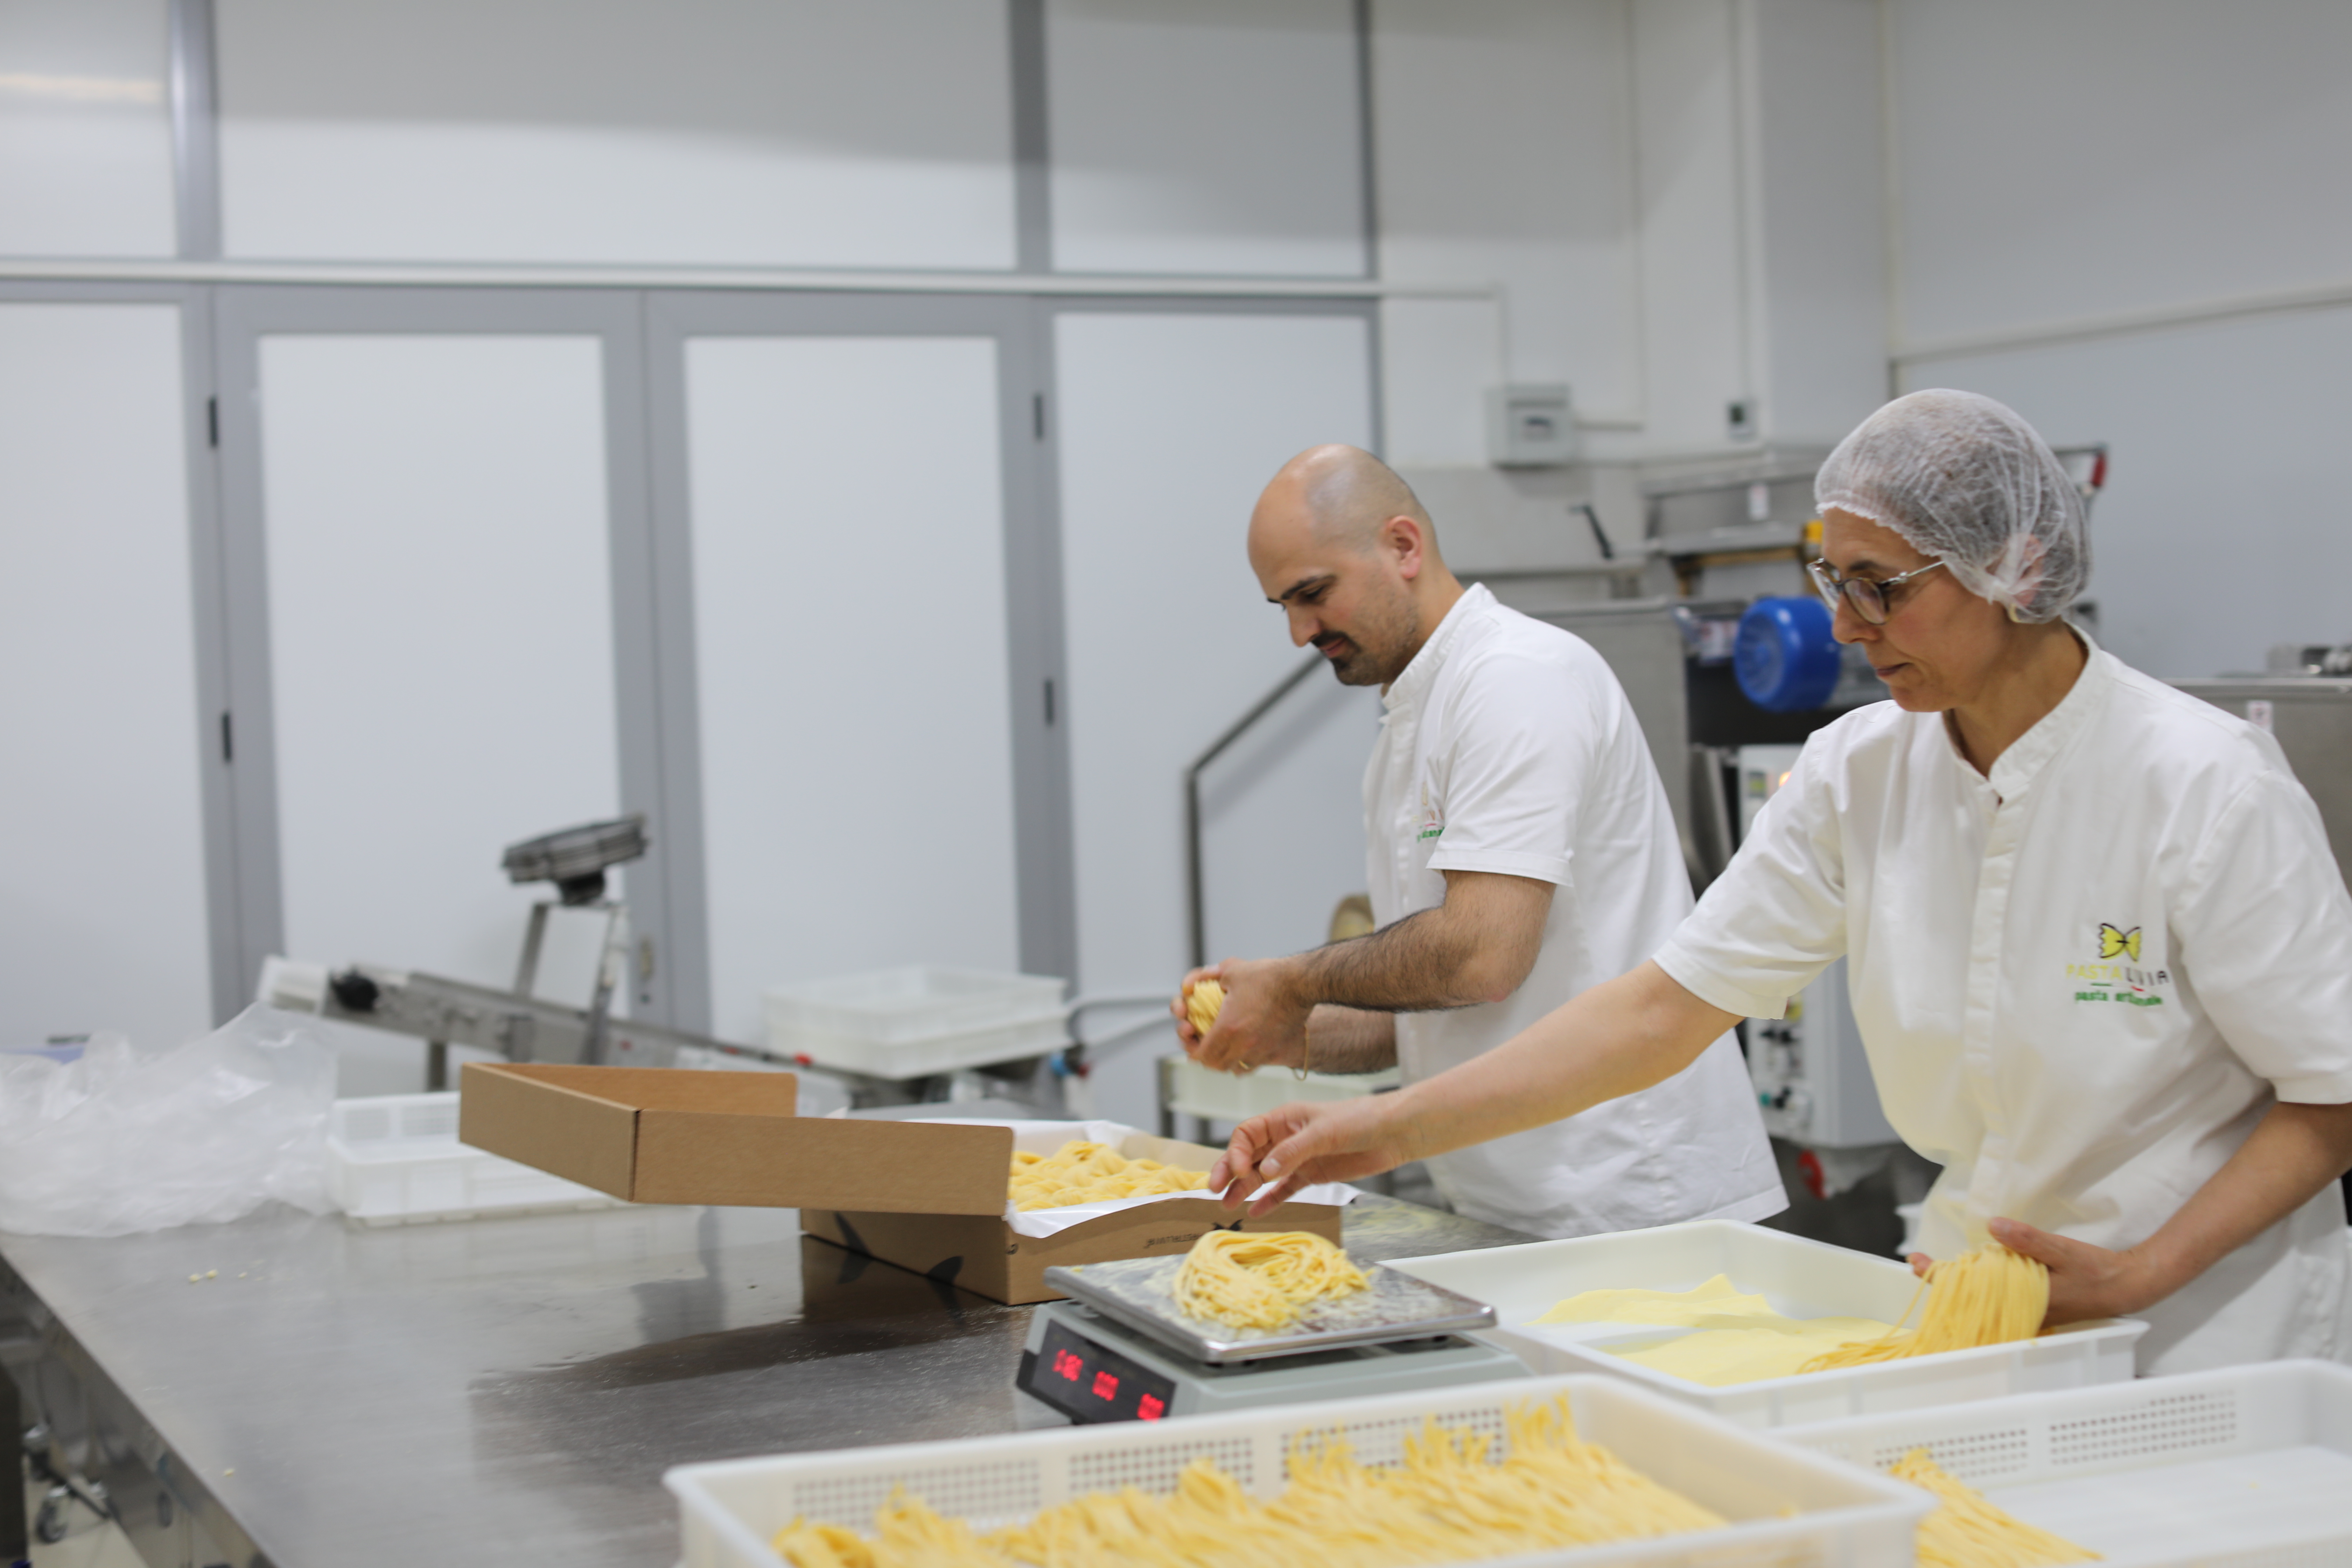 Founded in 2014 by entrepreneur Durim Shahinas, Pasta Livia has established itself as a prominent player in the gastronomy industry. 